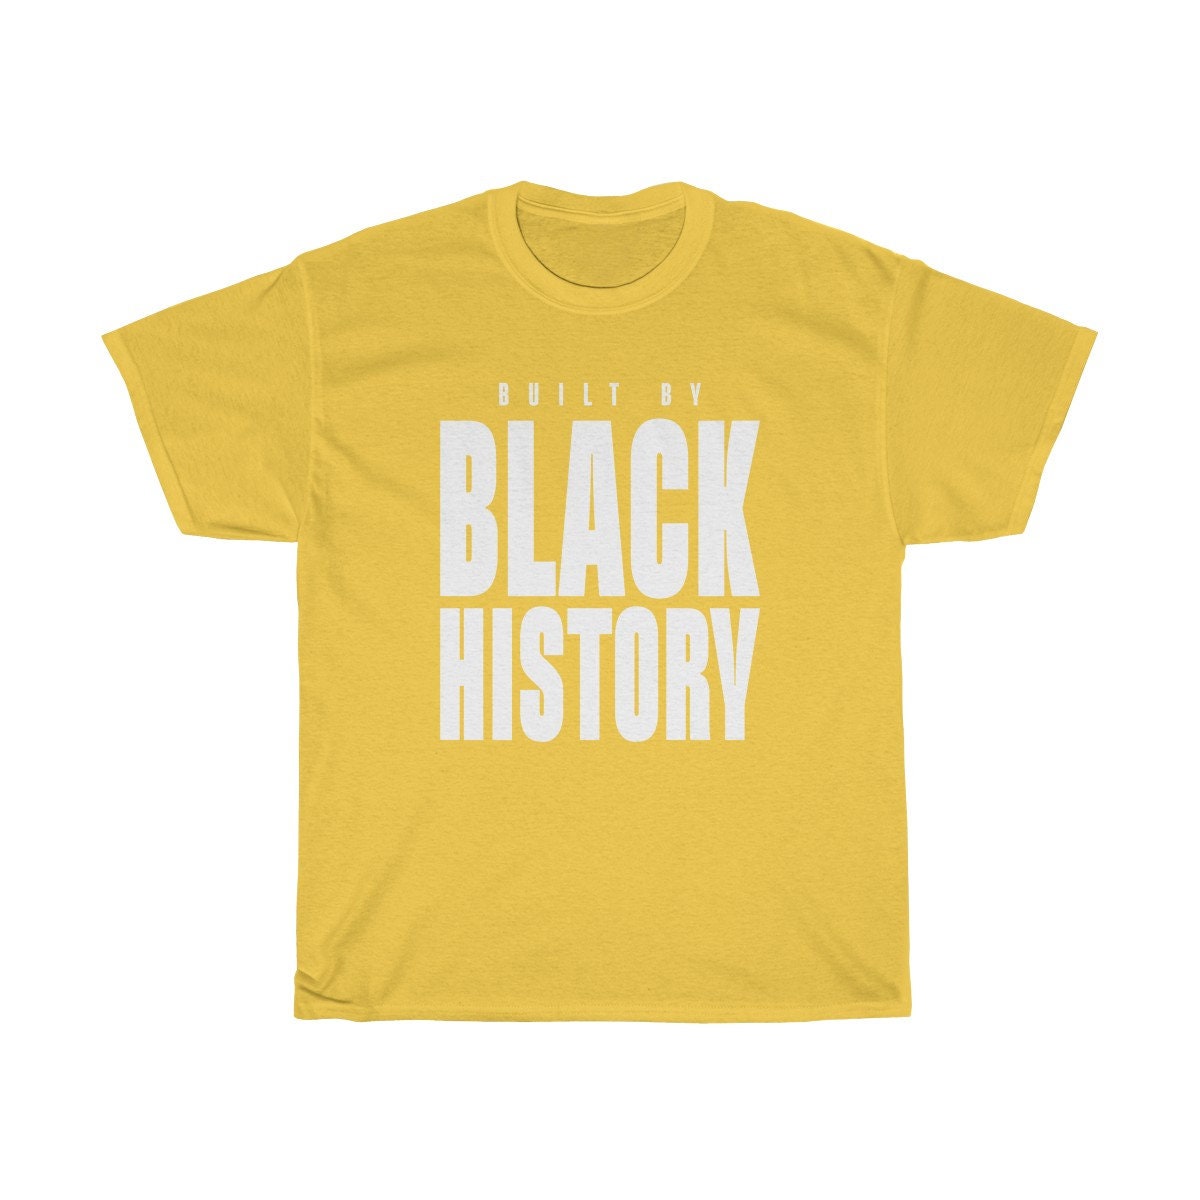 Official NBA Built By black History T Shirt